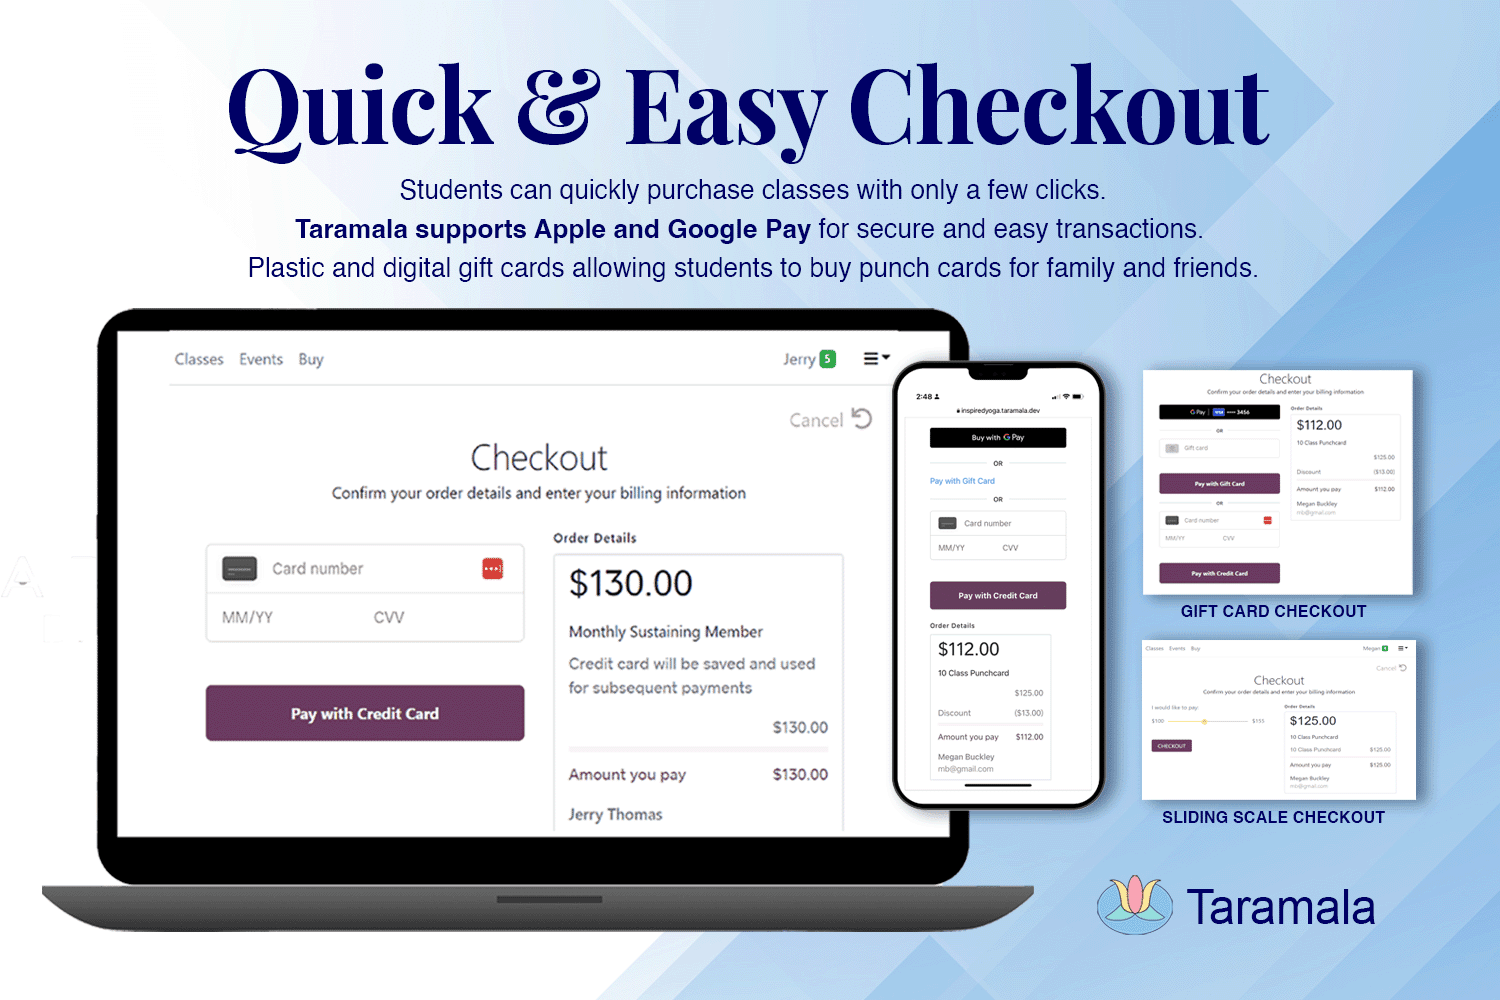 Quick & Easy Checkout